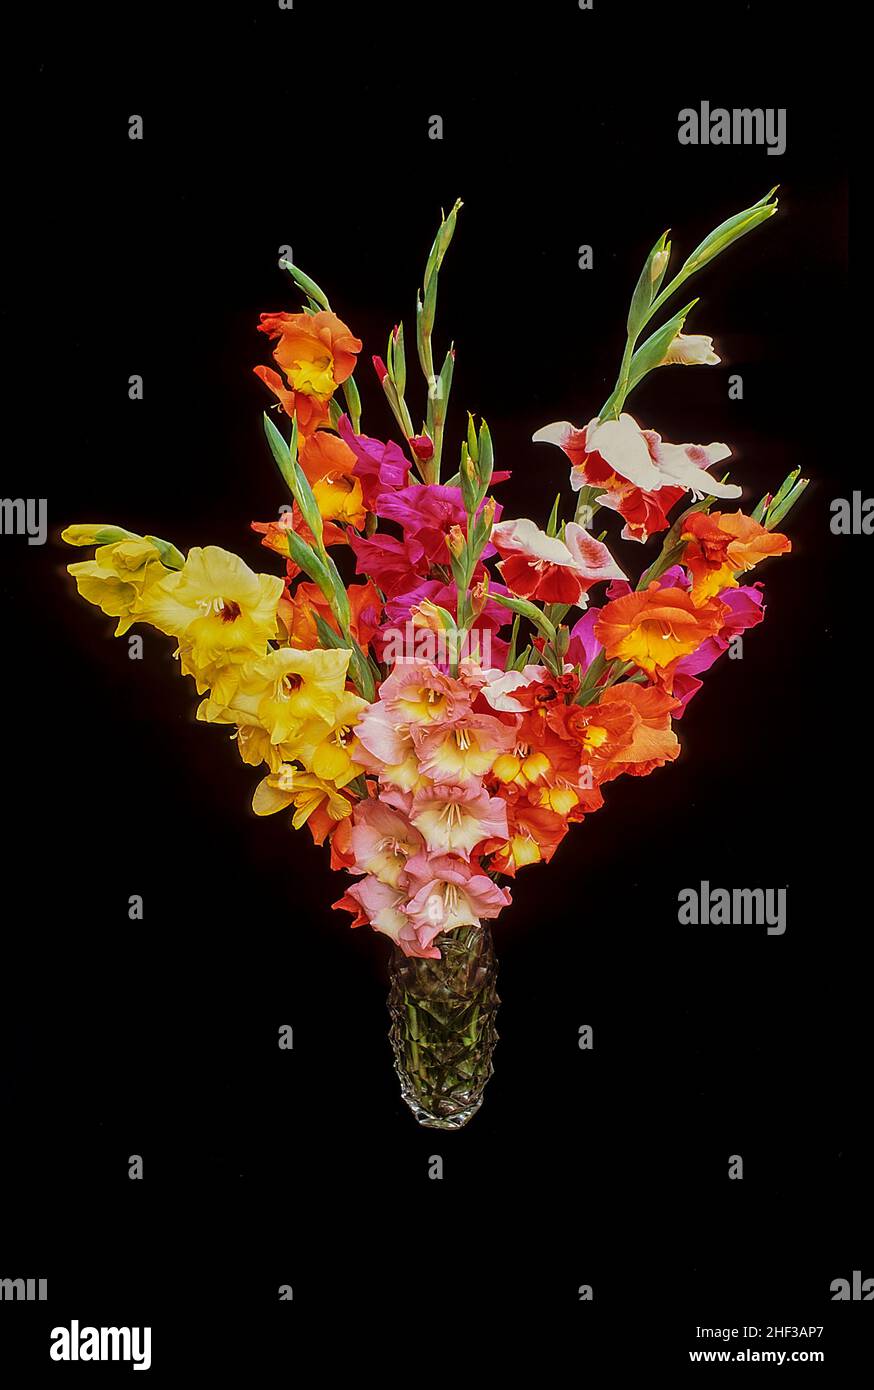 Mixed Gladioli in a glass vase set against a black background. Stock Photo